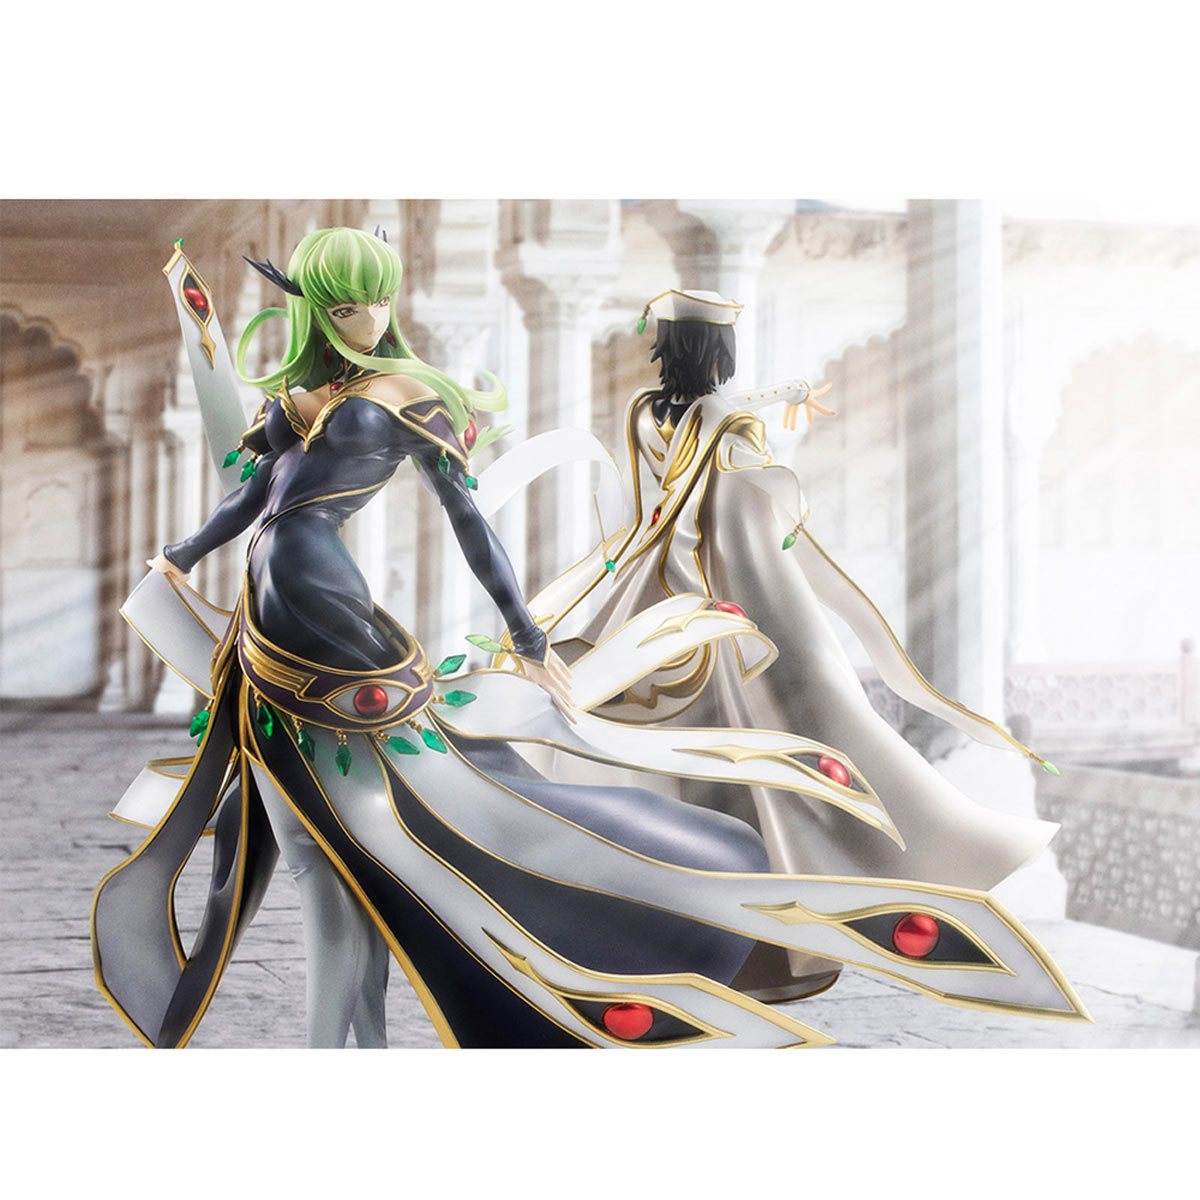 c.c & Lelouch-Merry Christmas!^^ Animated Picture Codes and